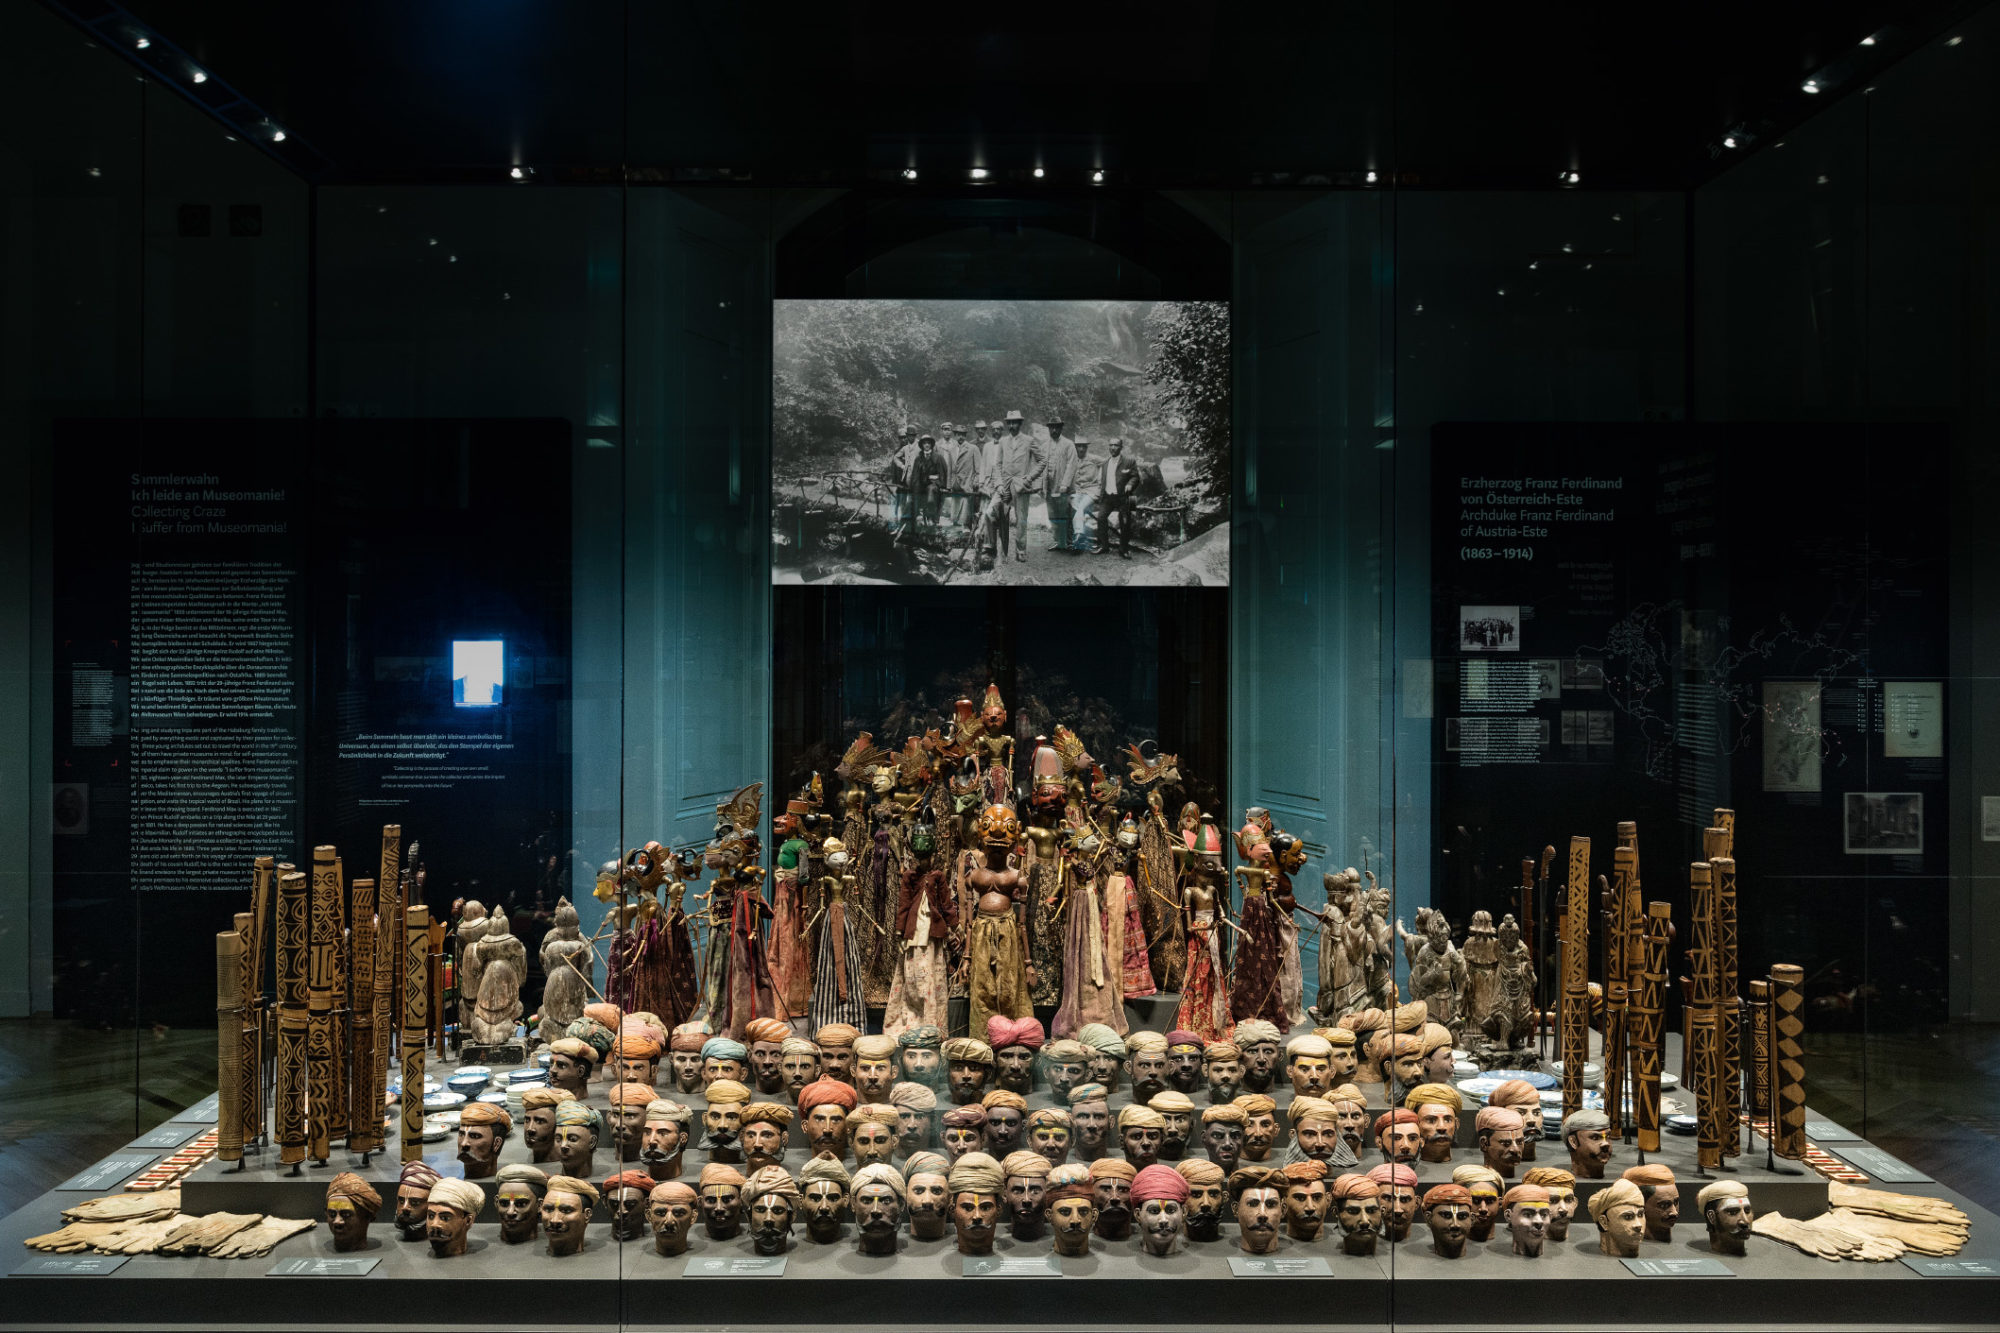 An installation of figurines and rows of heads in a museum